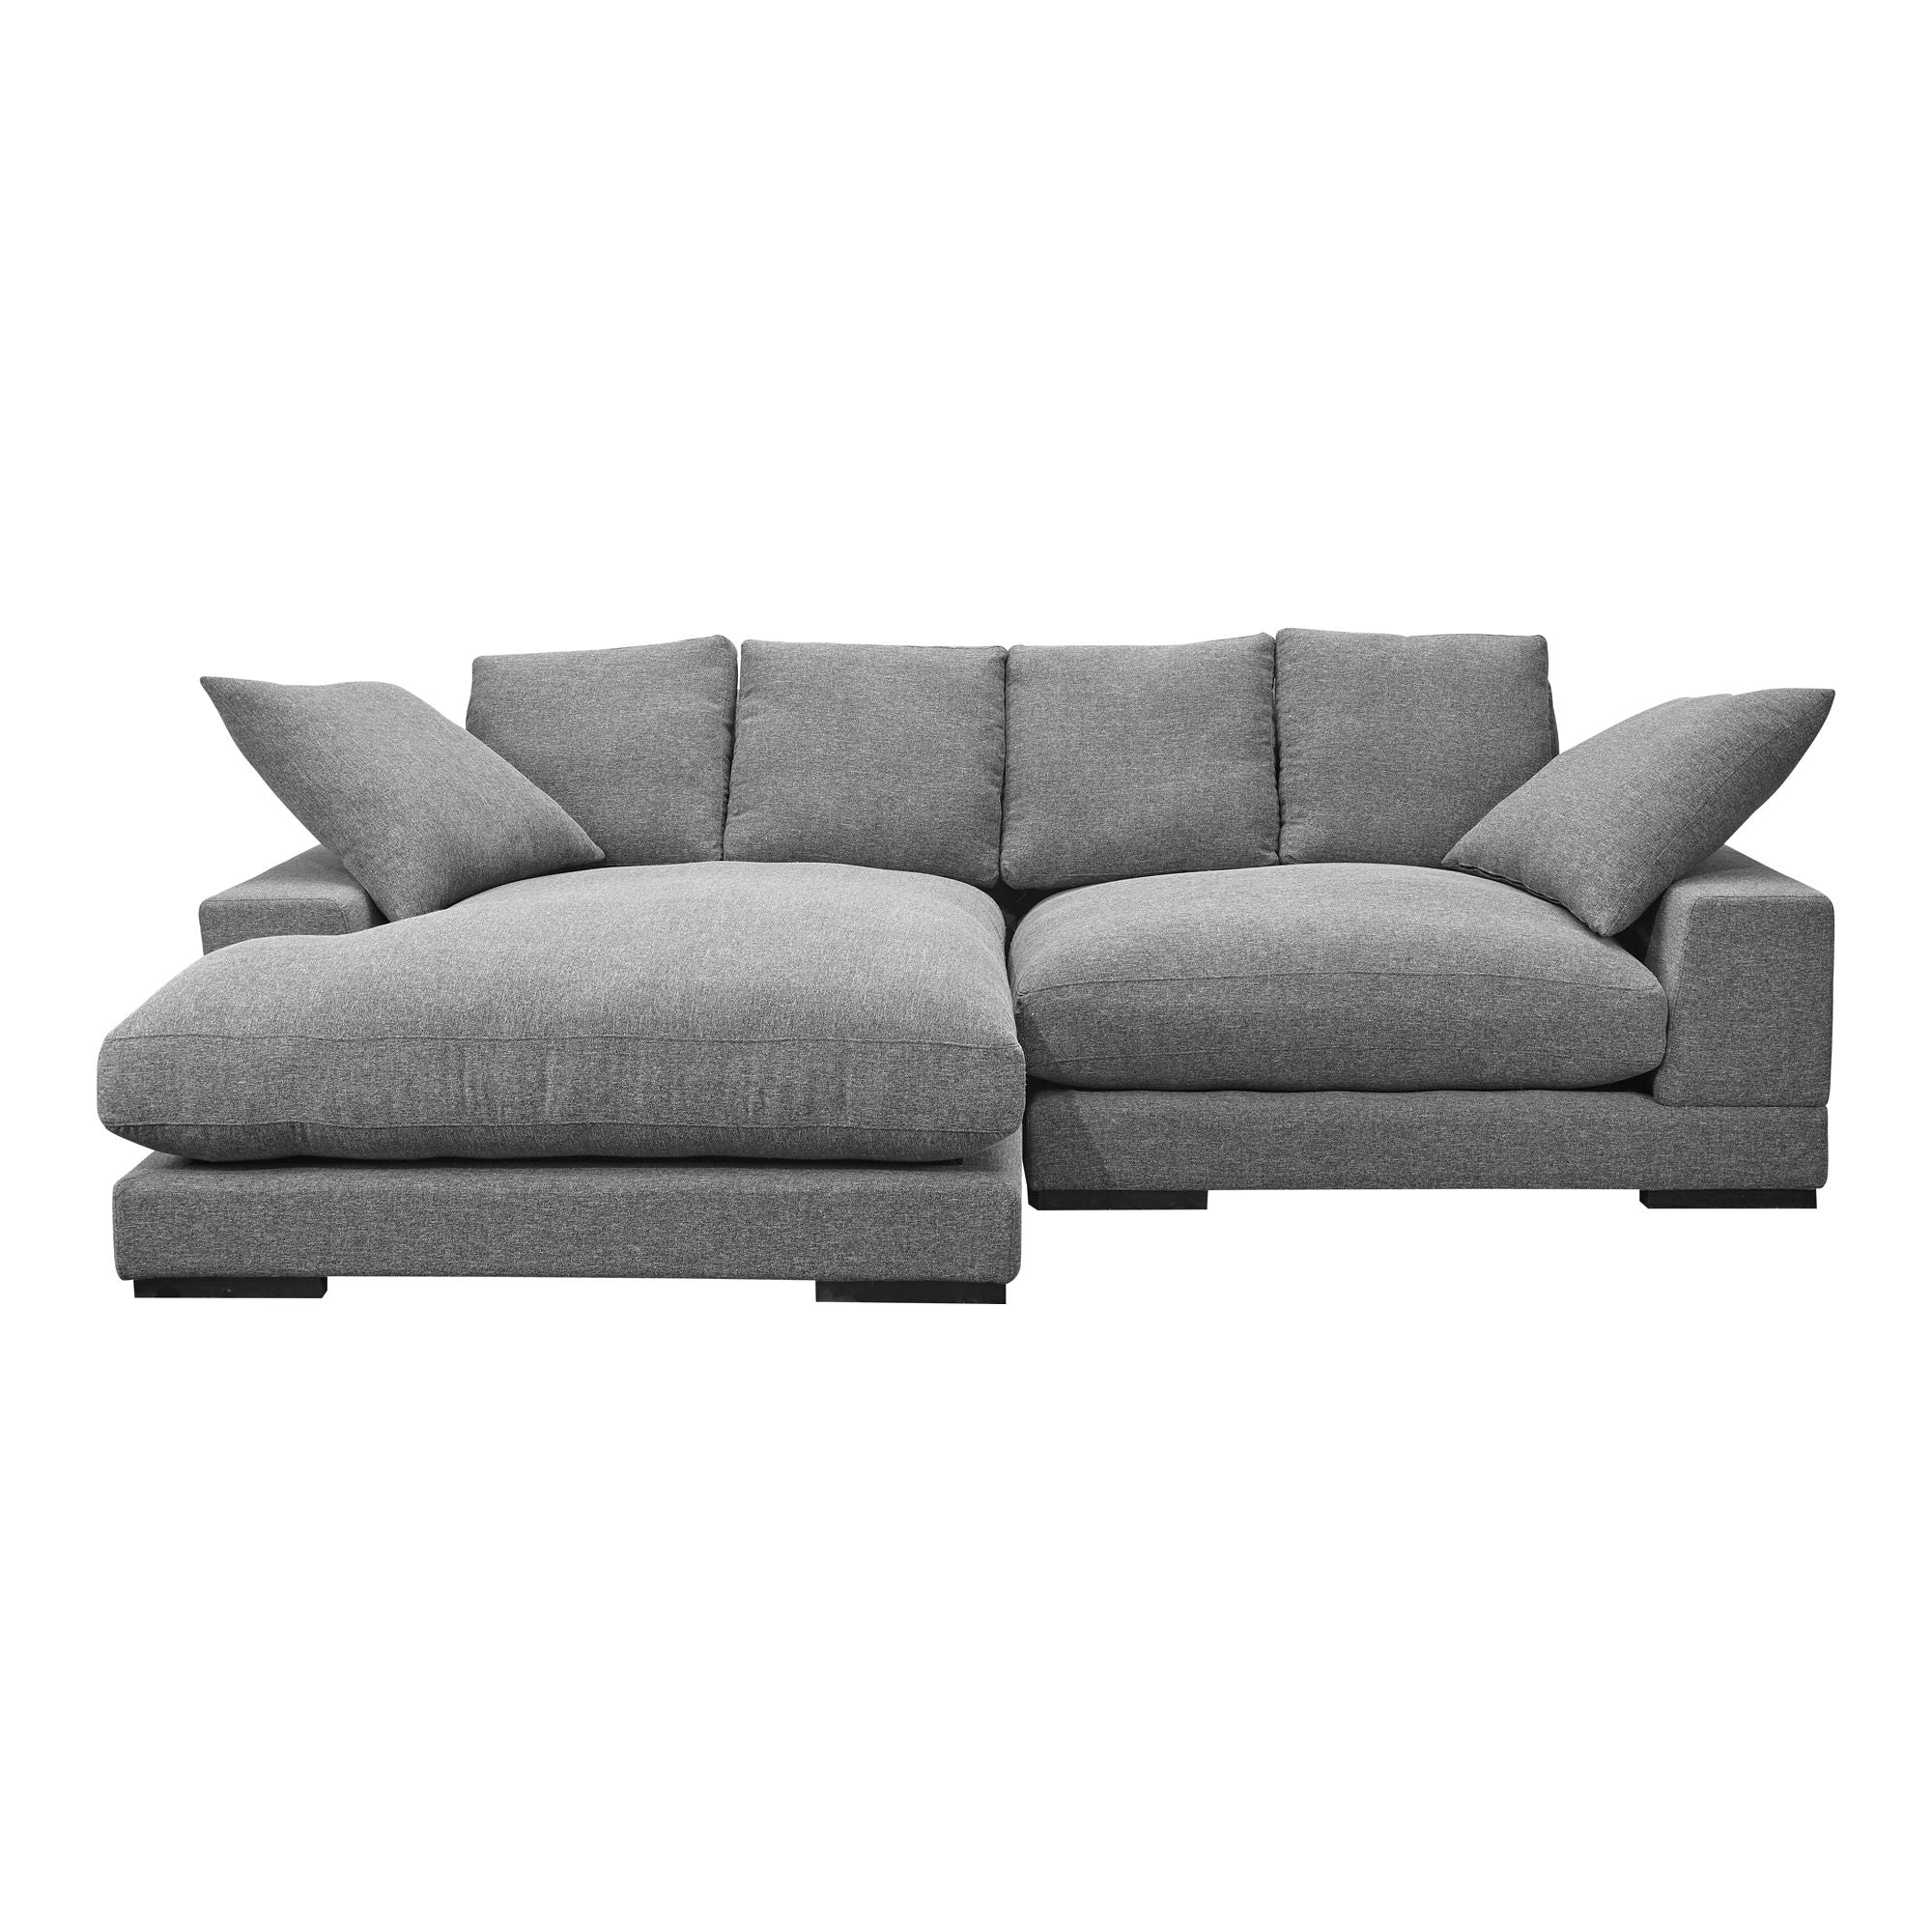 Plunge - Sectional - Grey - Fabric